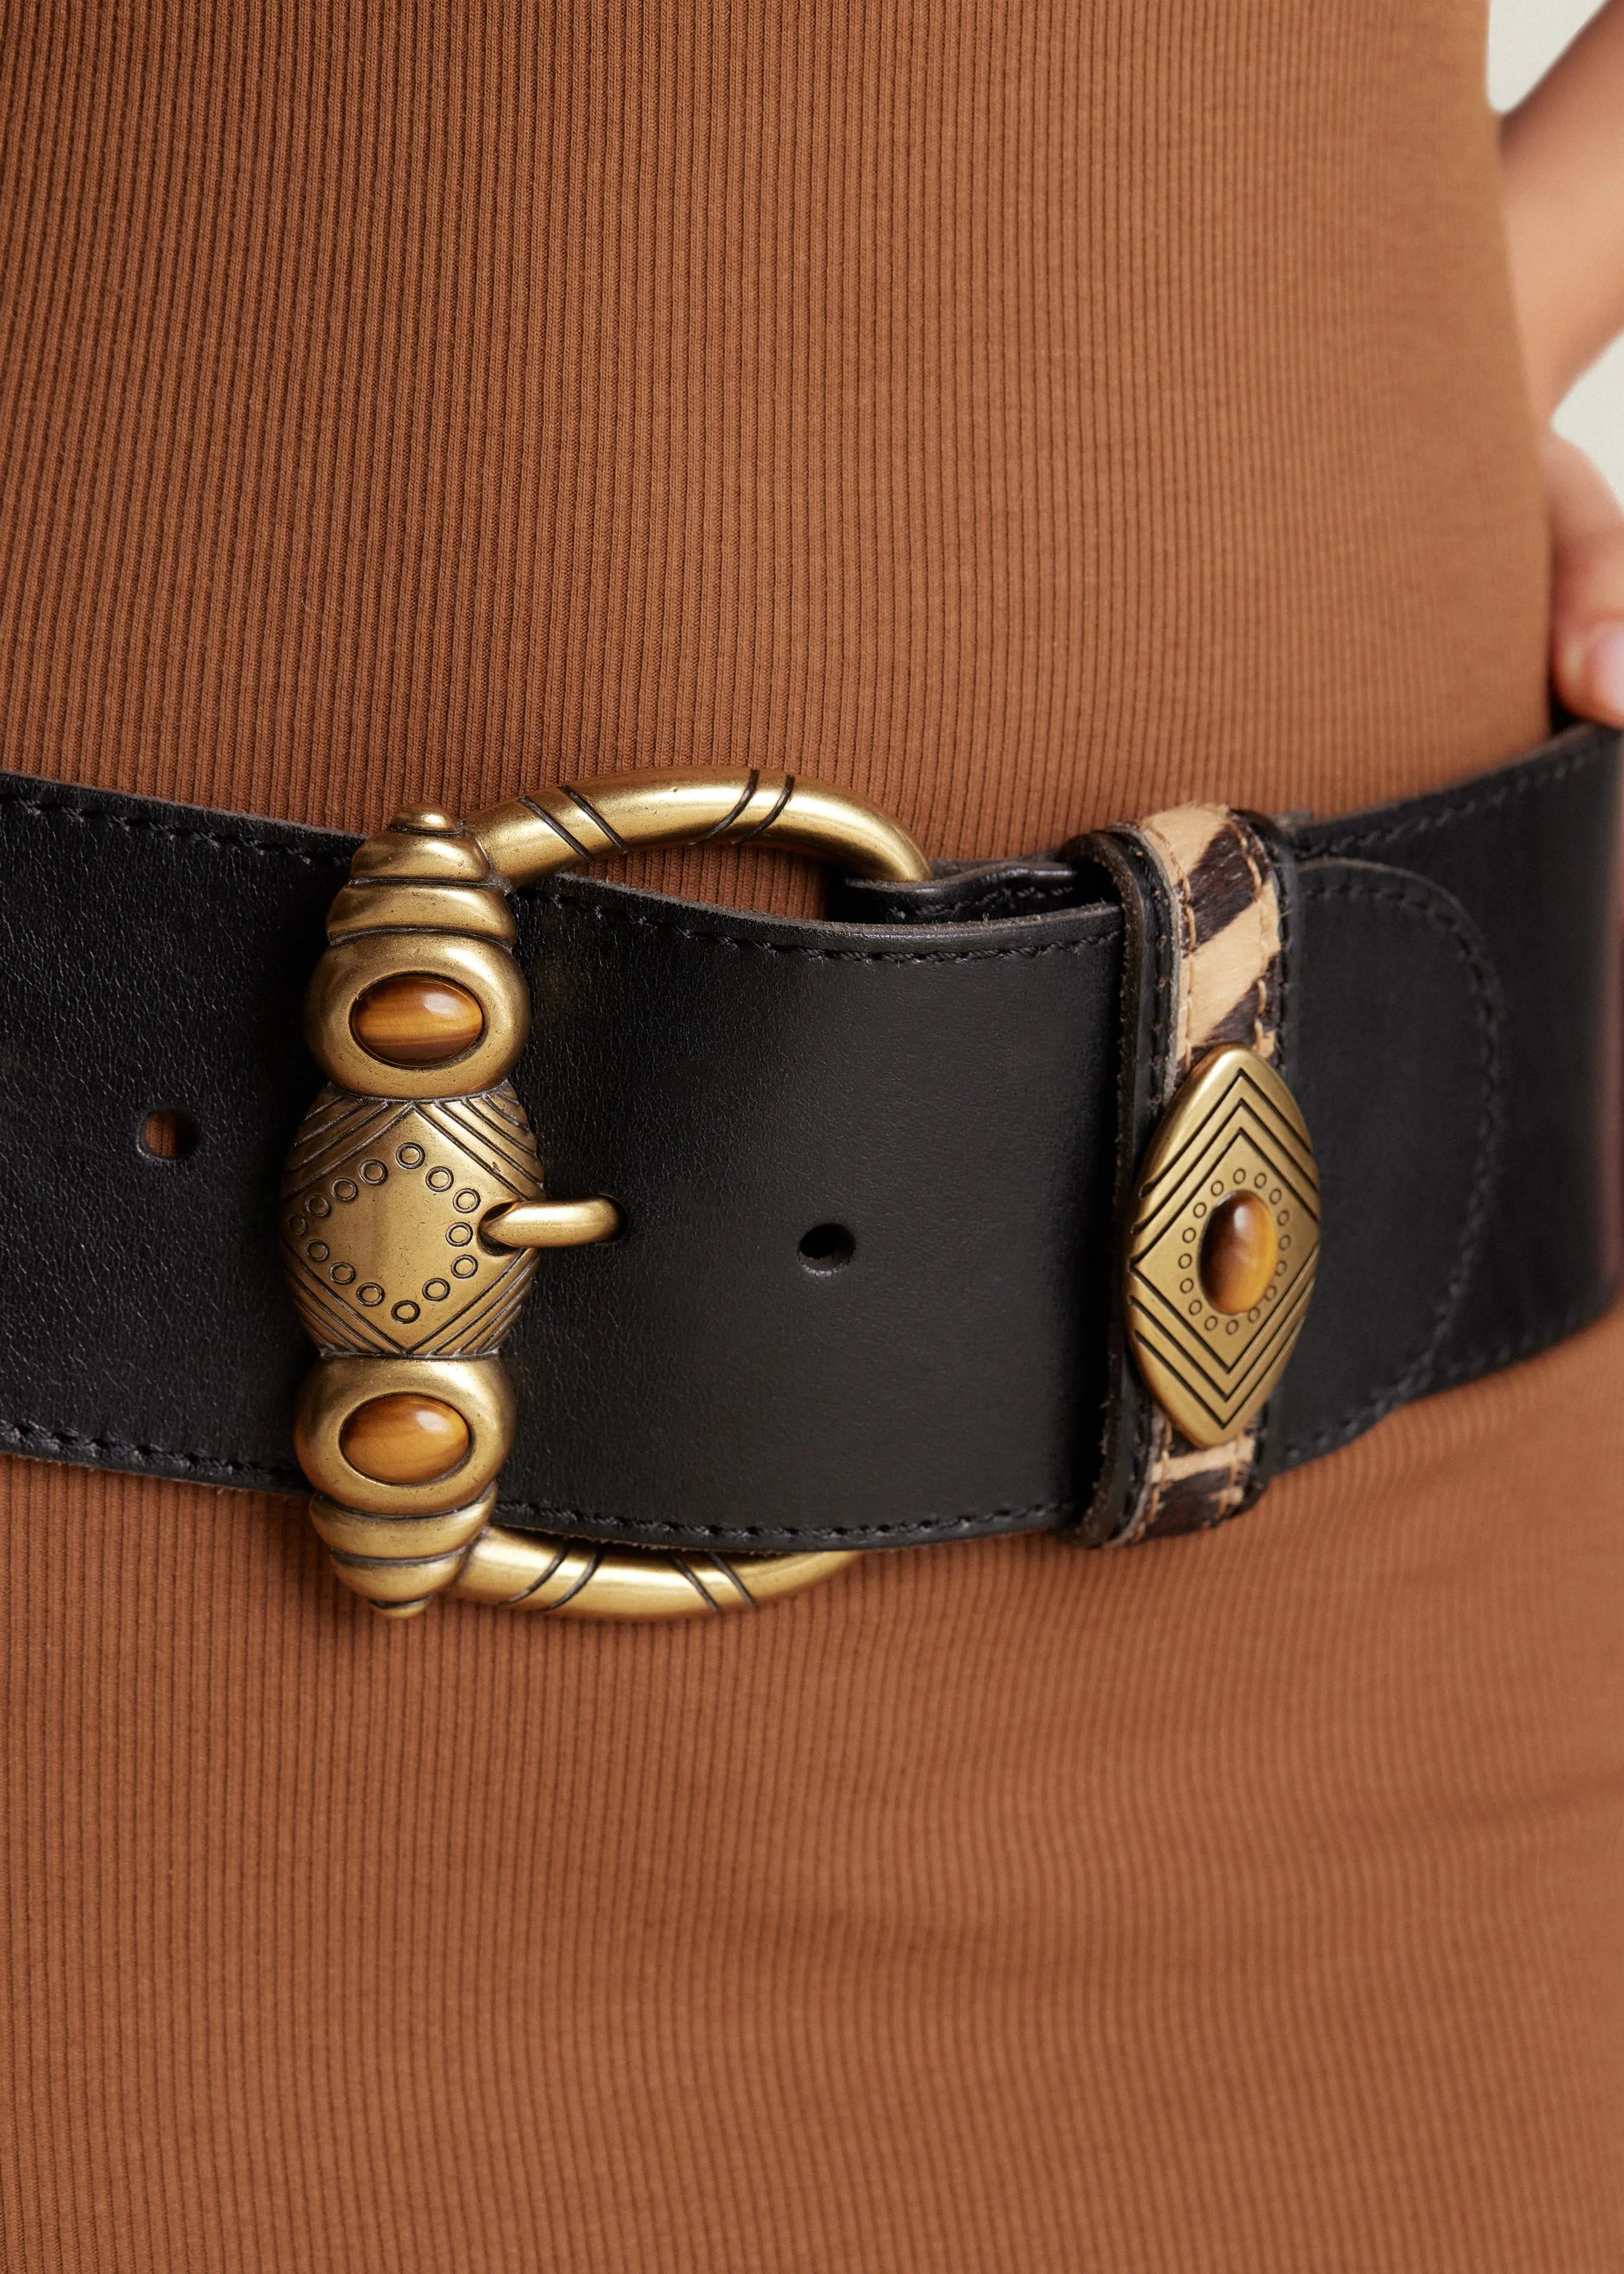 The Aspen Belt: Featuring semi-precious stones on an embossed buckle, it's an archival vintage design with a contour shape. With a width of 3”, zebra haircalf, and hand-burnished vintage leather, it captivates with timeless quality. 